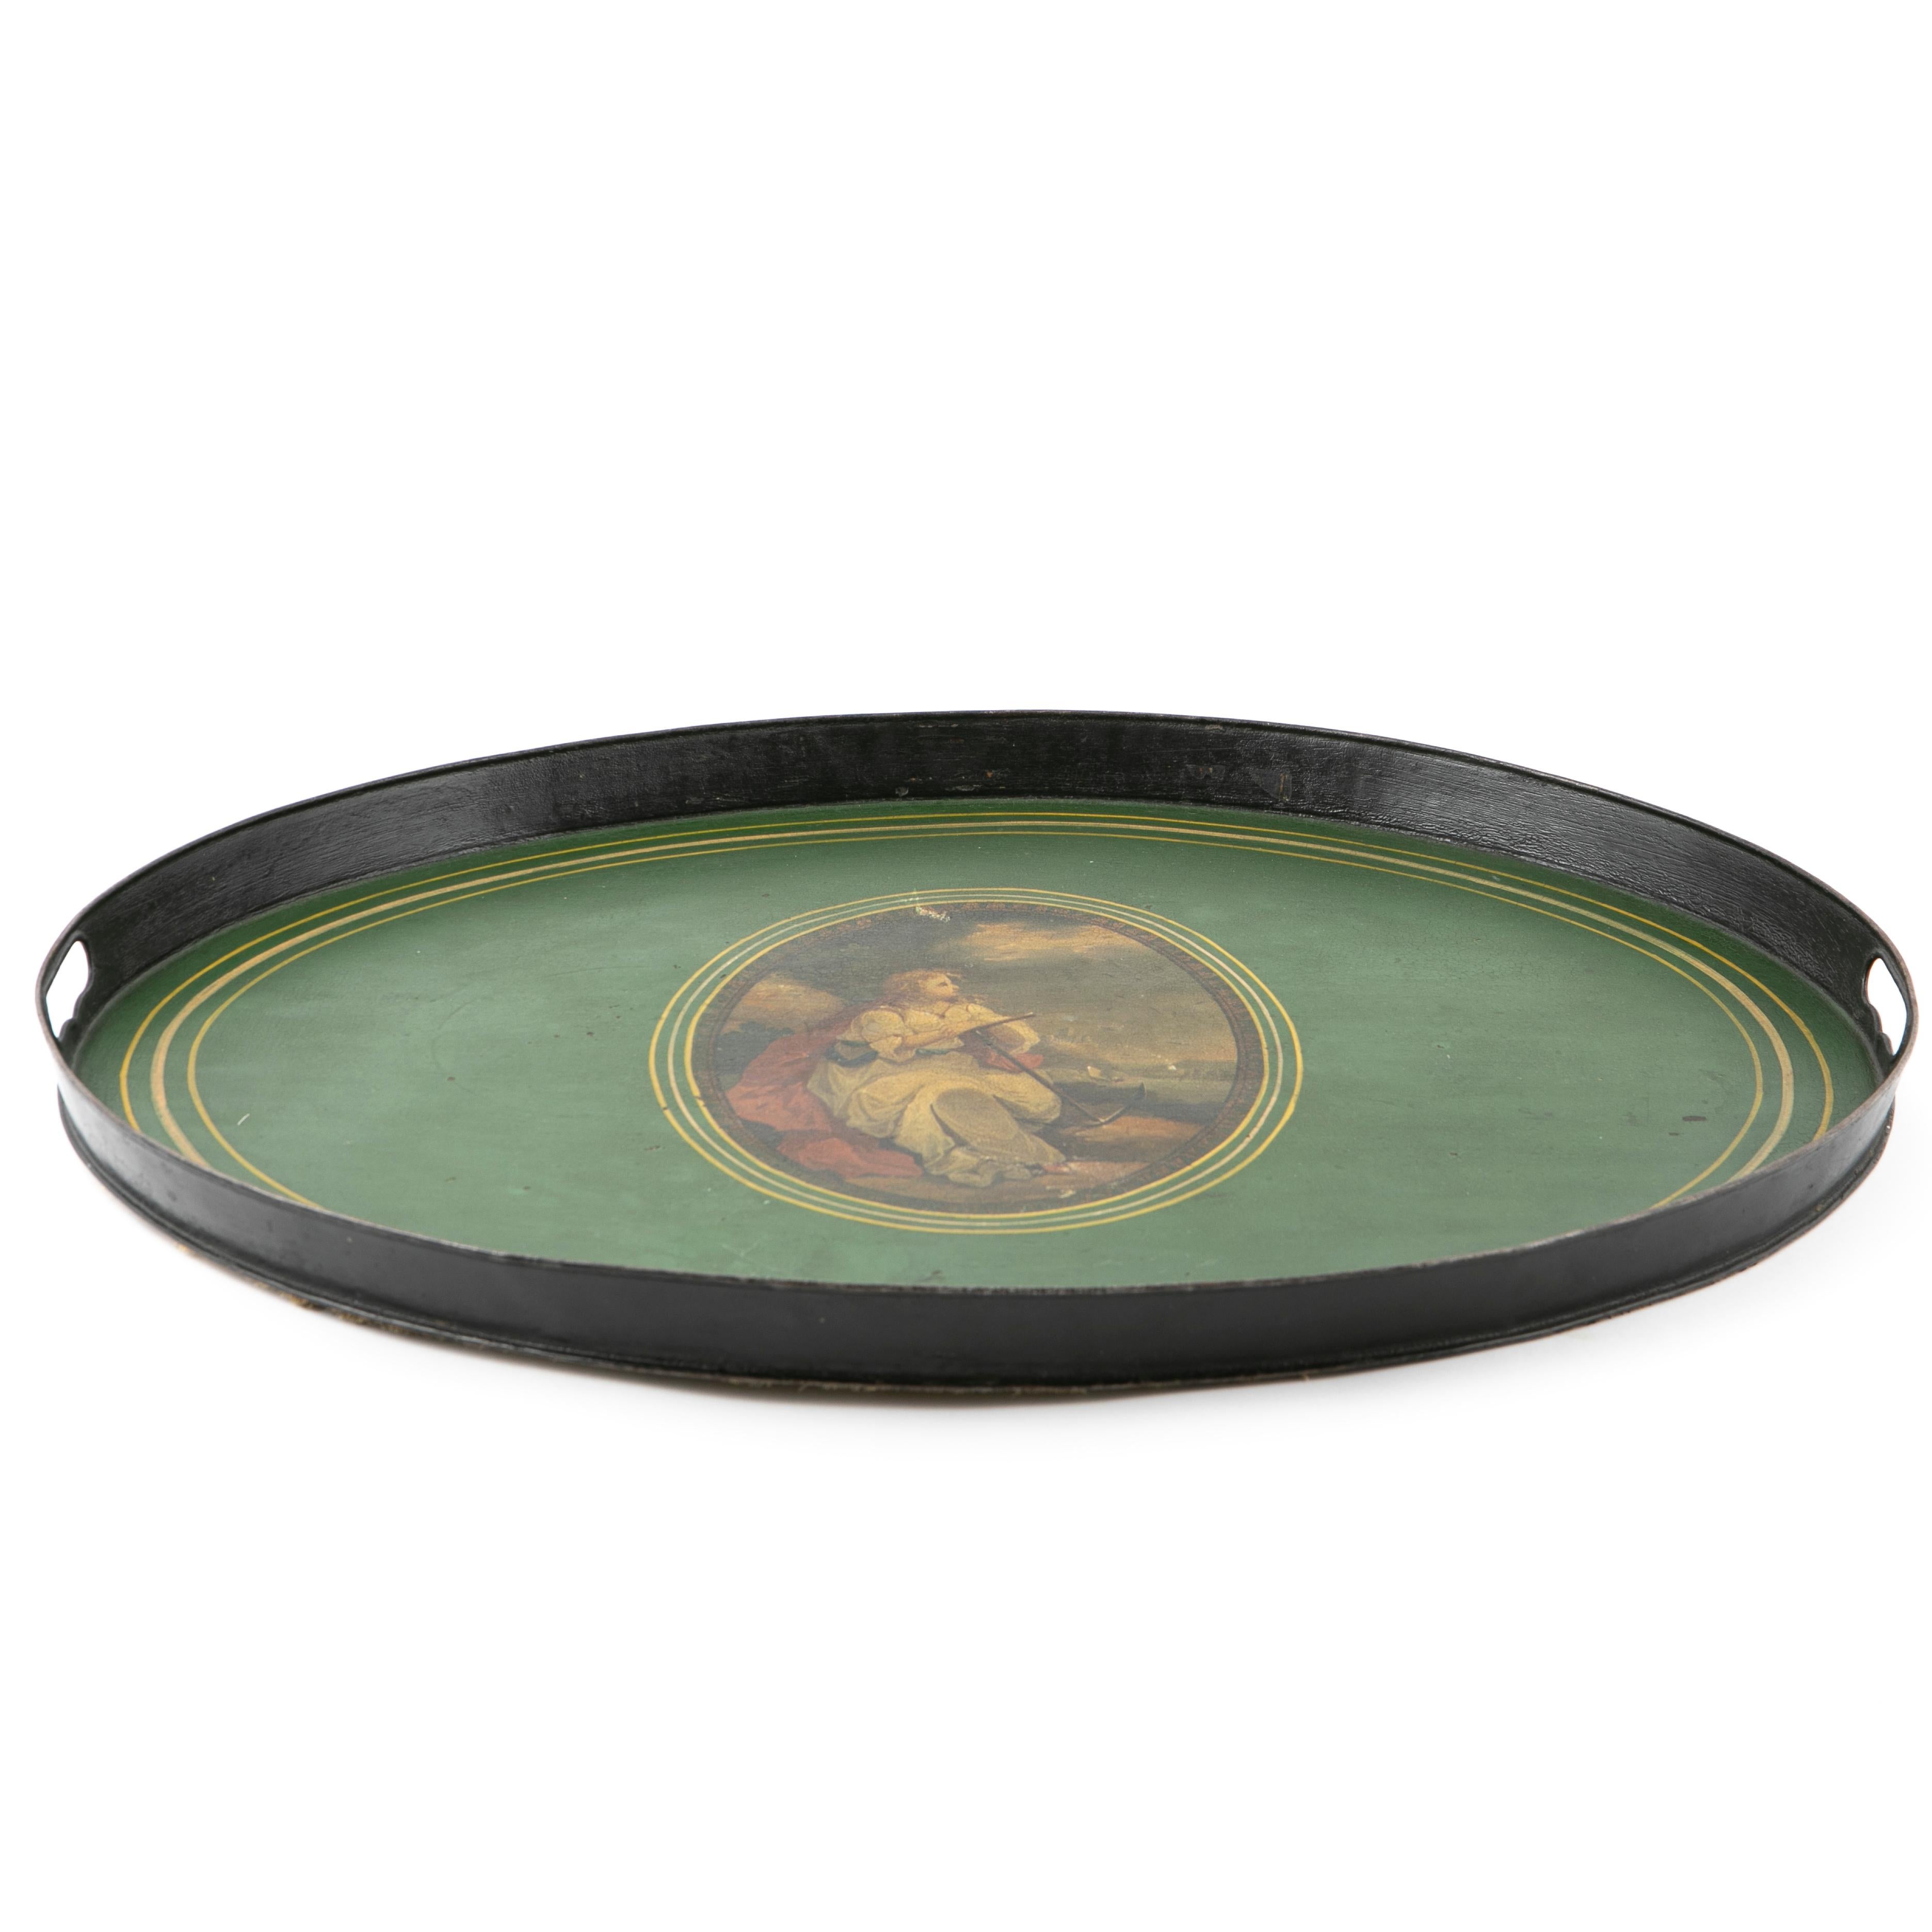 Large English early 19th century oval tole tray.
Metal beautifully painted with an oval center medallion with coastline scene of a young woman with anchor scouting out to sea. Standing rim with pierced side handles.
The tray table is in excellent